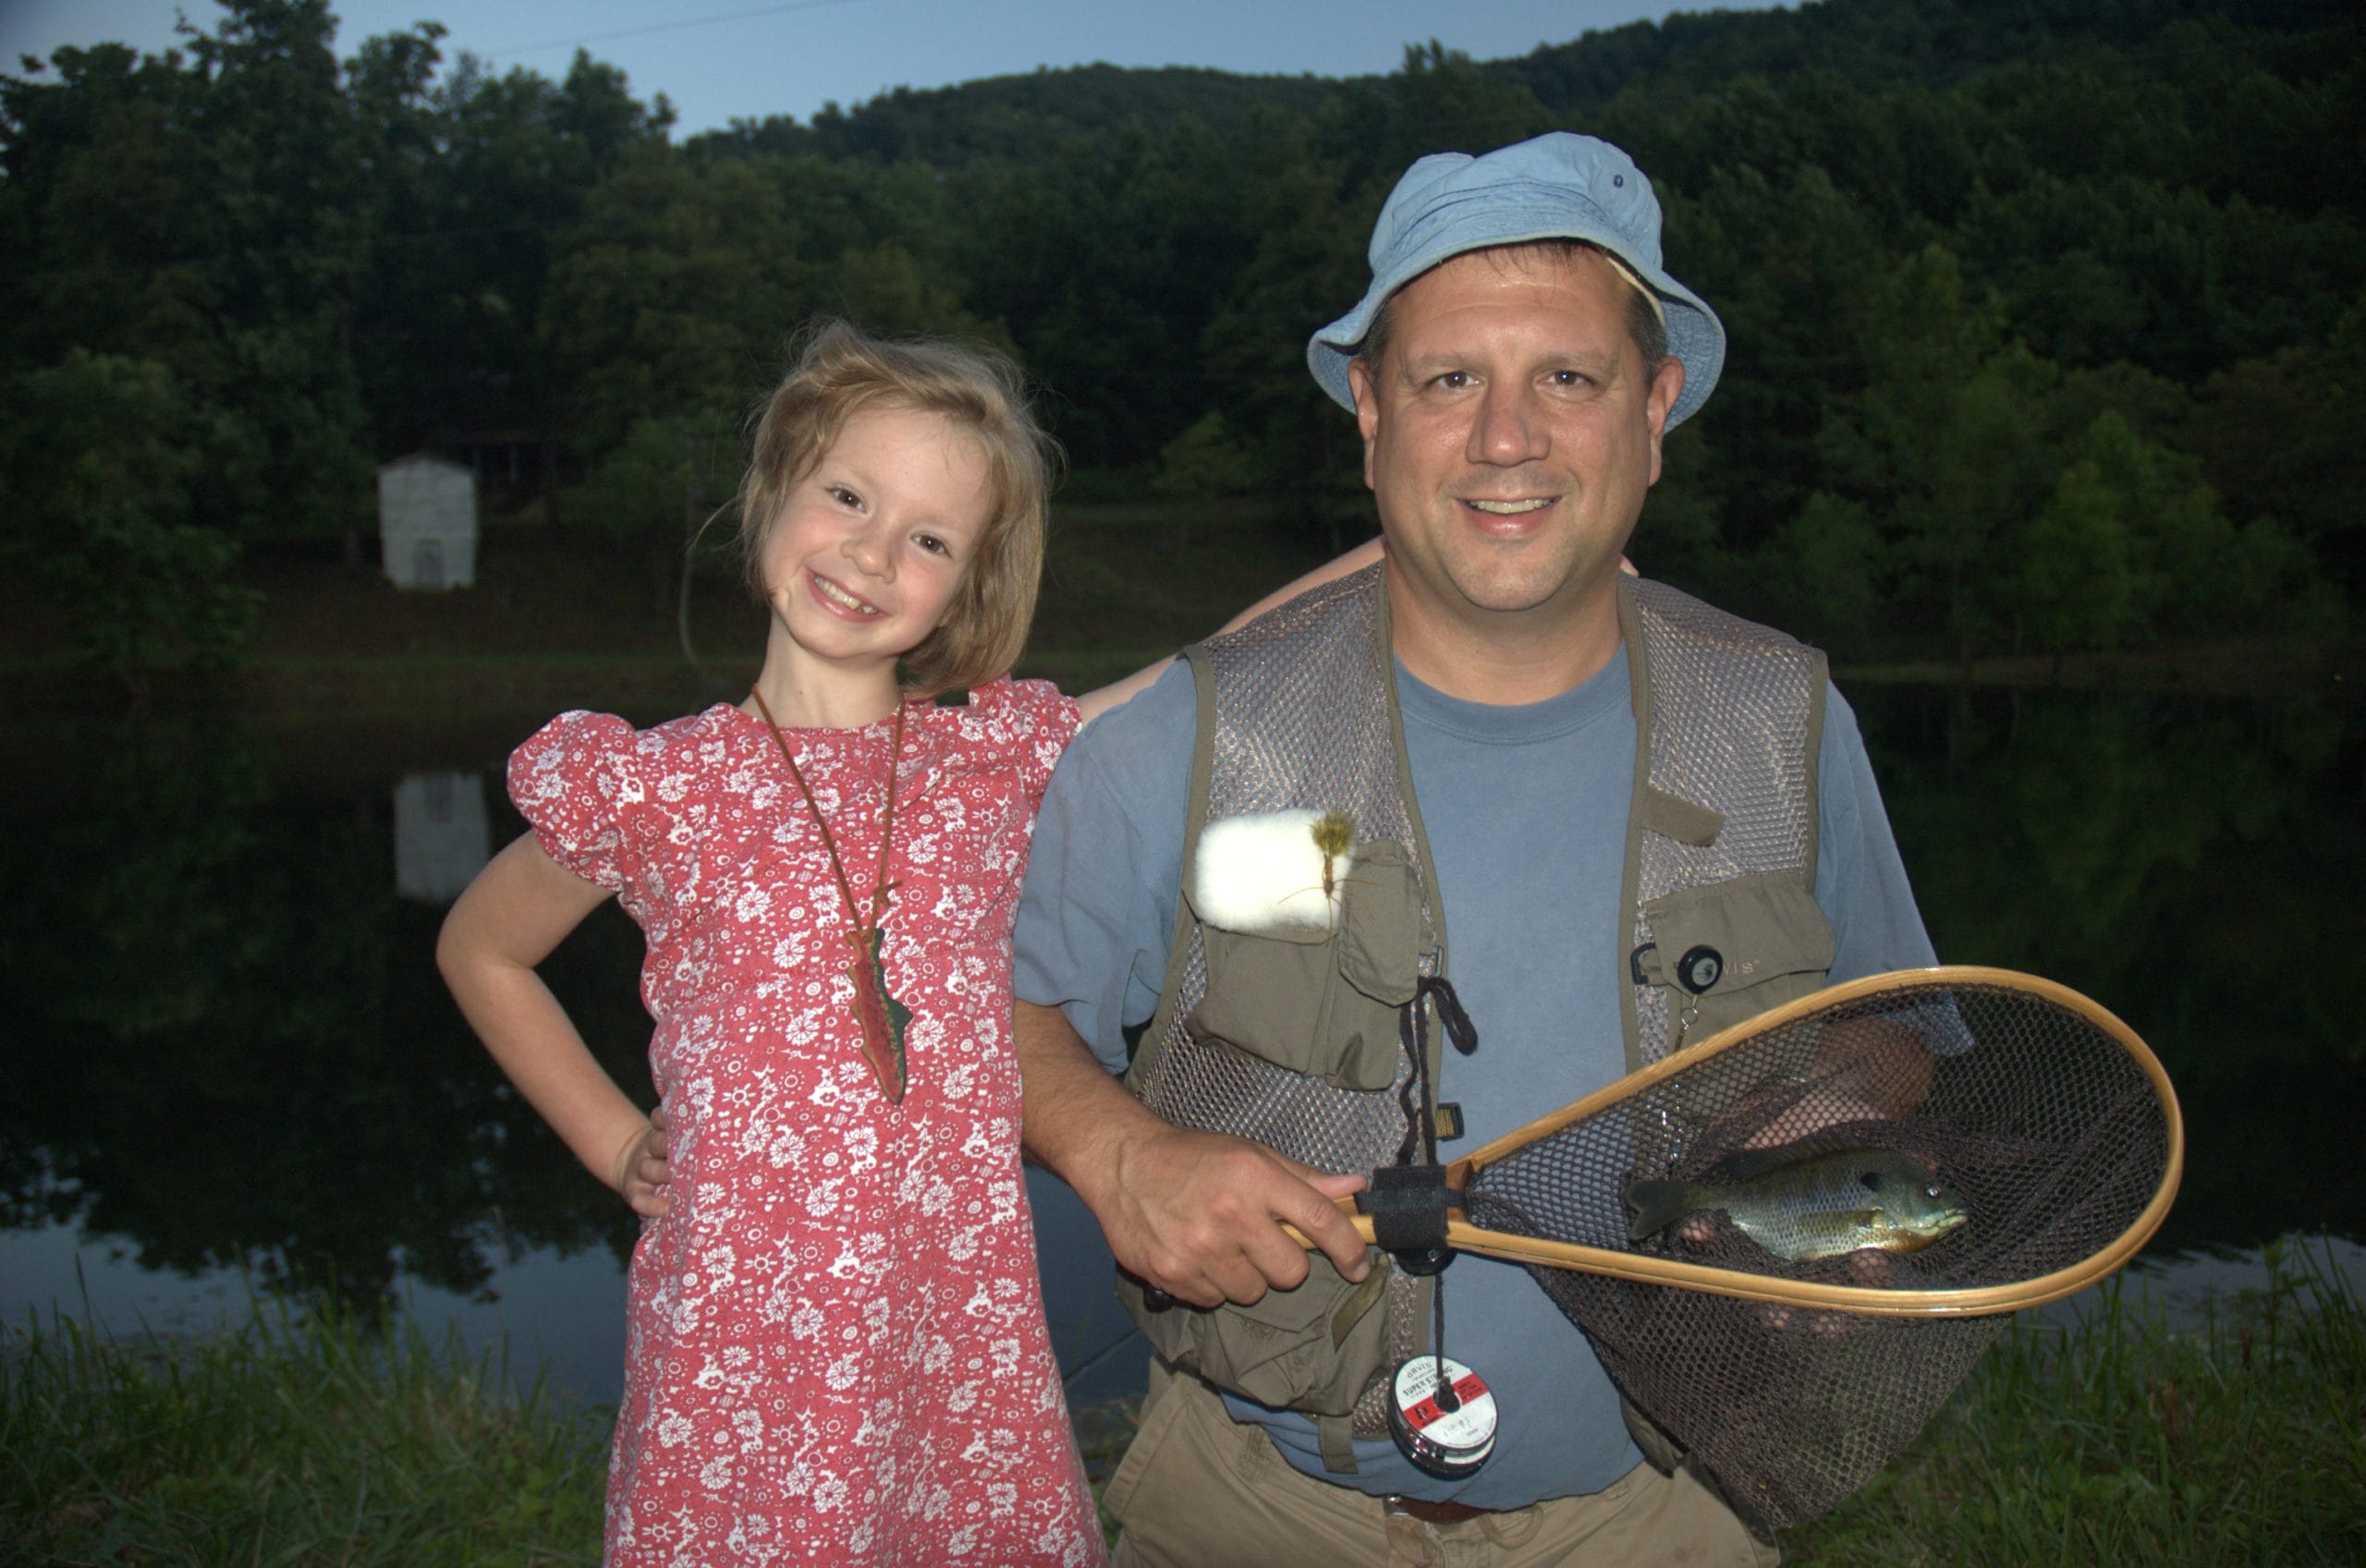 Working on the next generation of women fly anglers. The author out fishing with his daughter Maggie, who loves fishing.